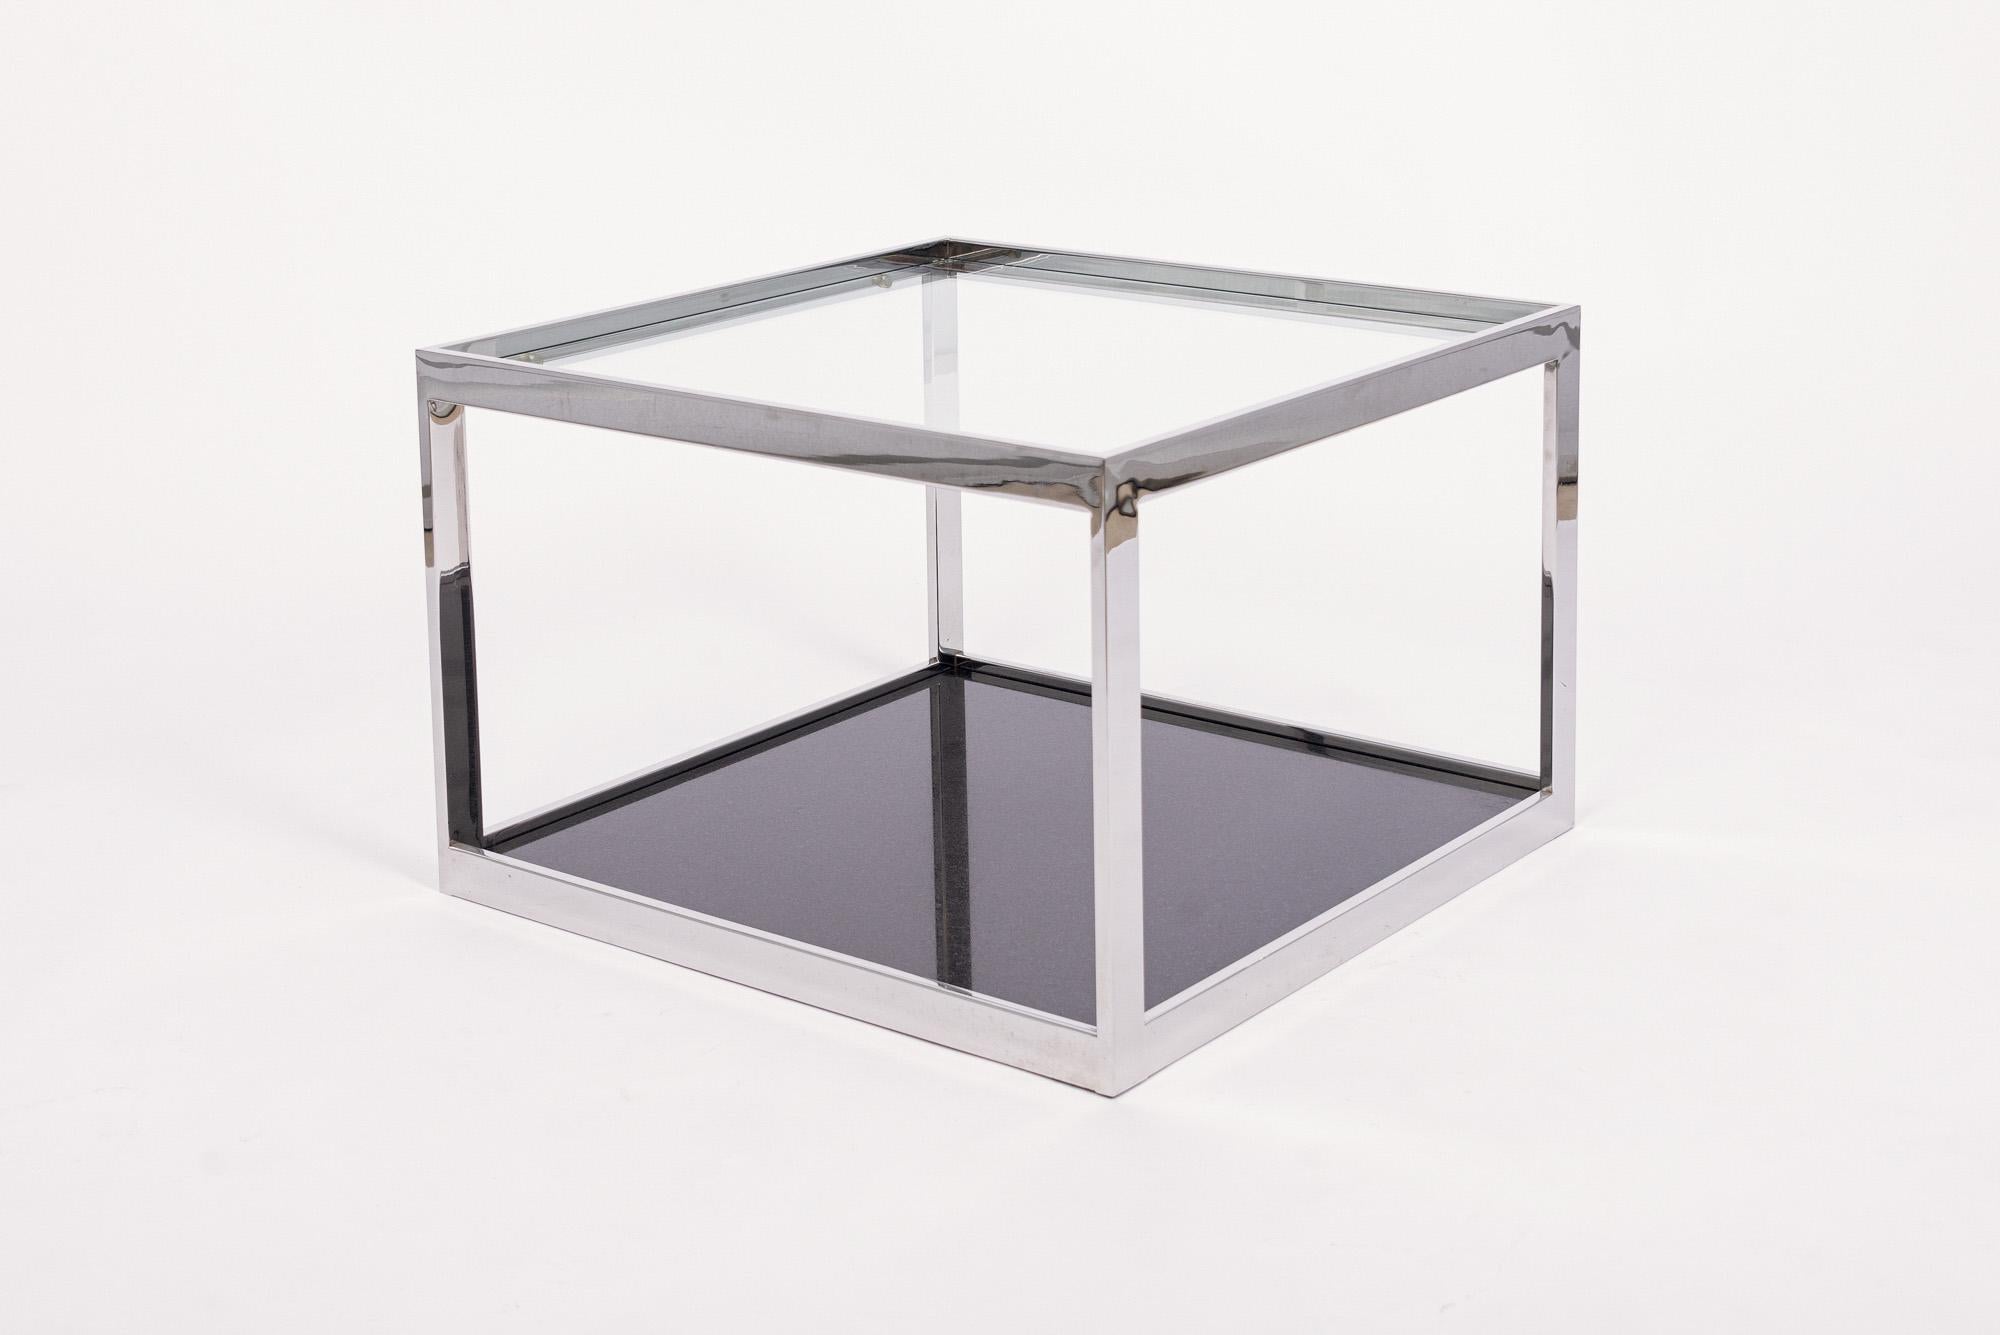 This vintage mid century modern Milo Baughman style side table is circa 1970. The square end table has a clean, minimalist design and features a chrome flat bar frame with a thick glass top and heavy black marble base. Both the glass top and marble